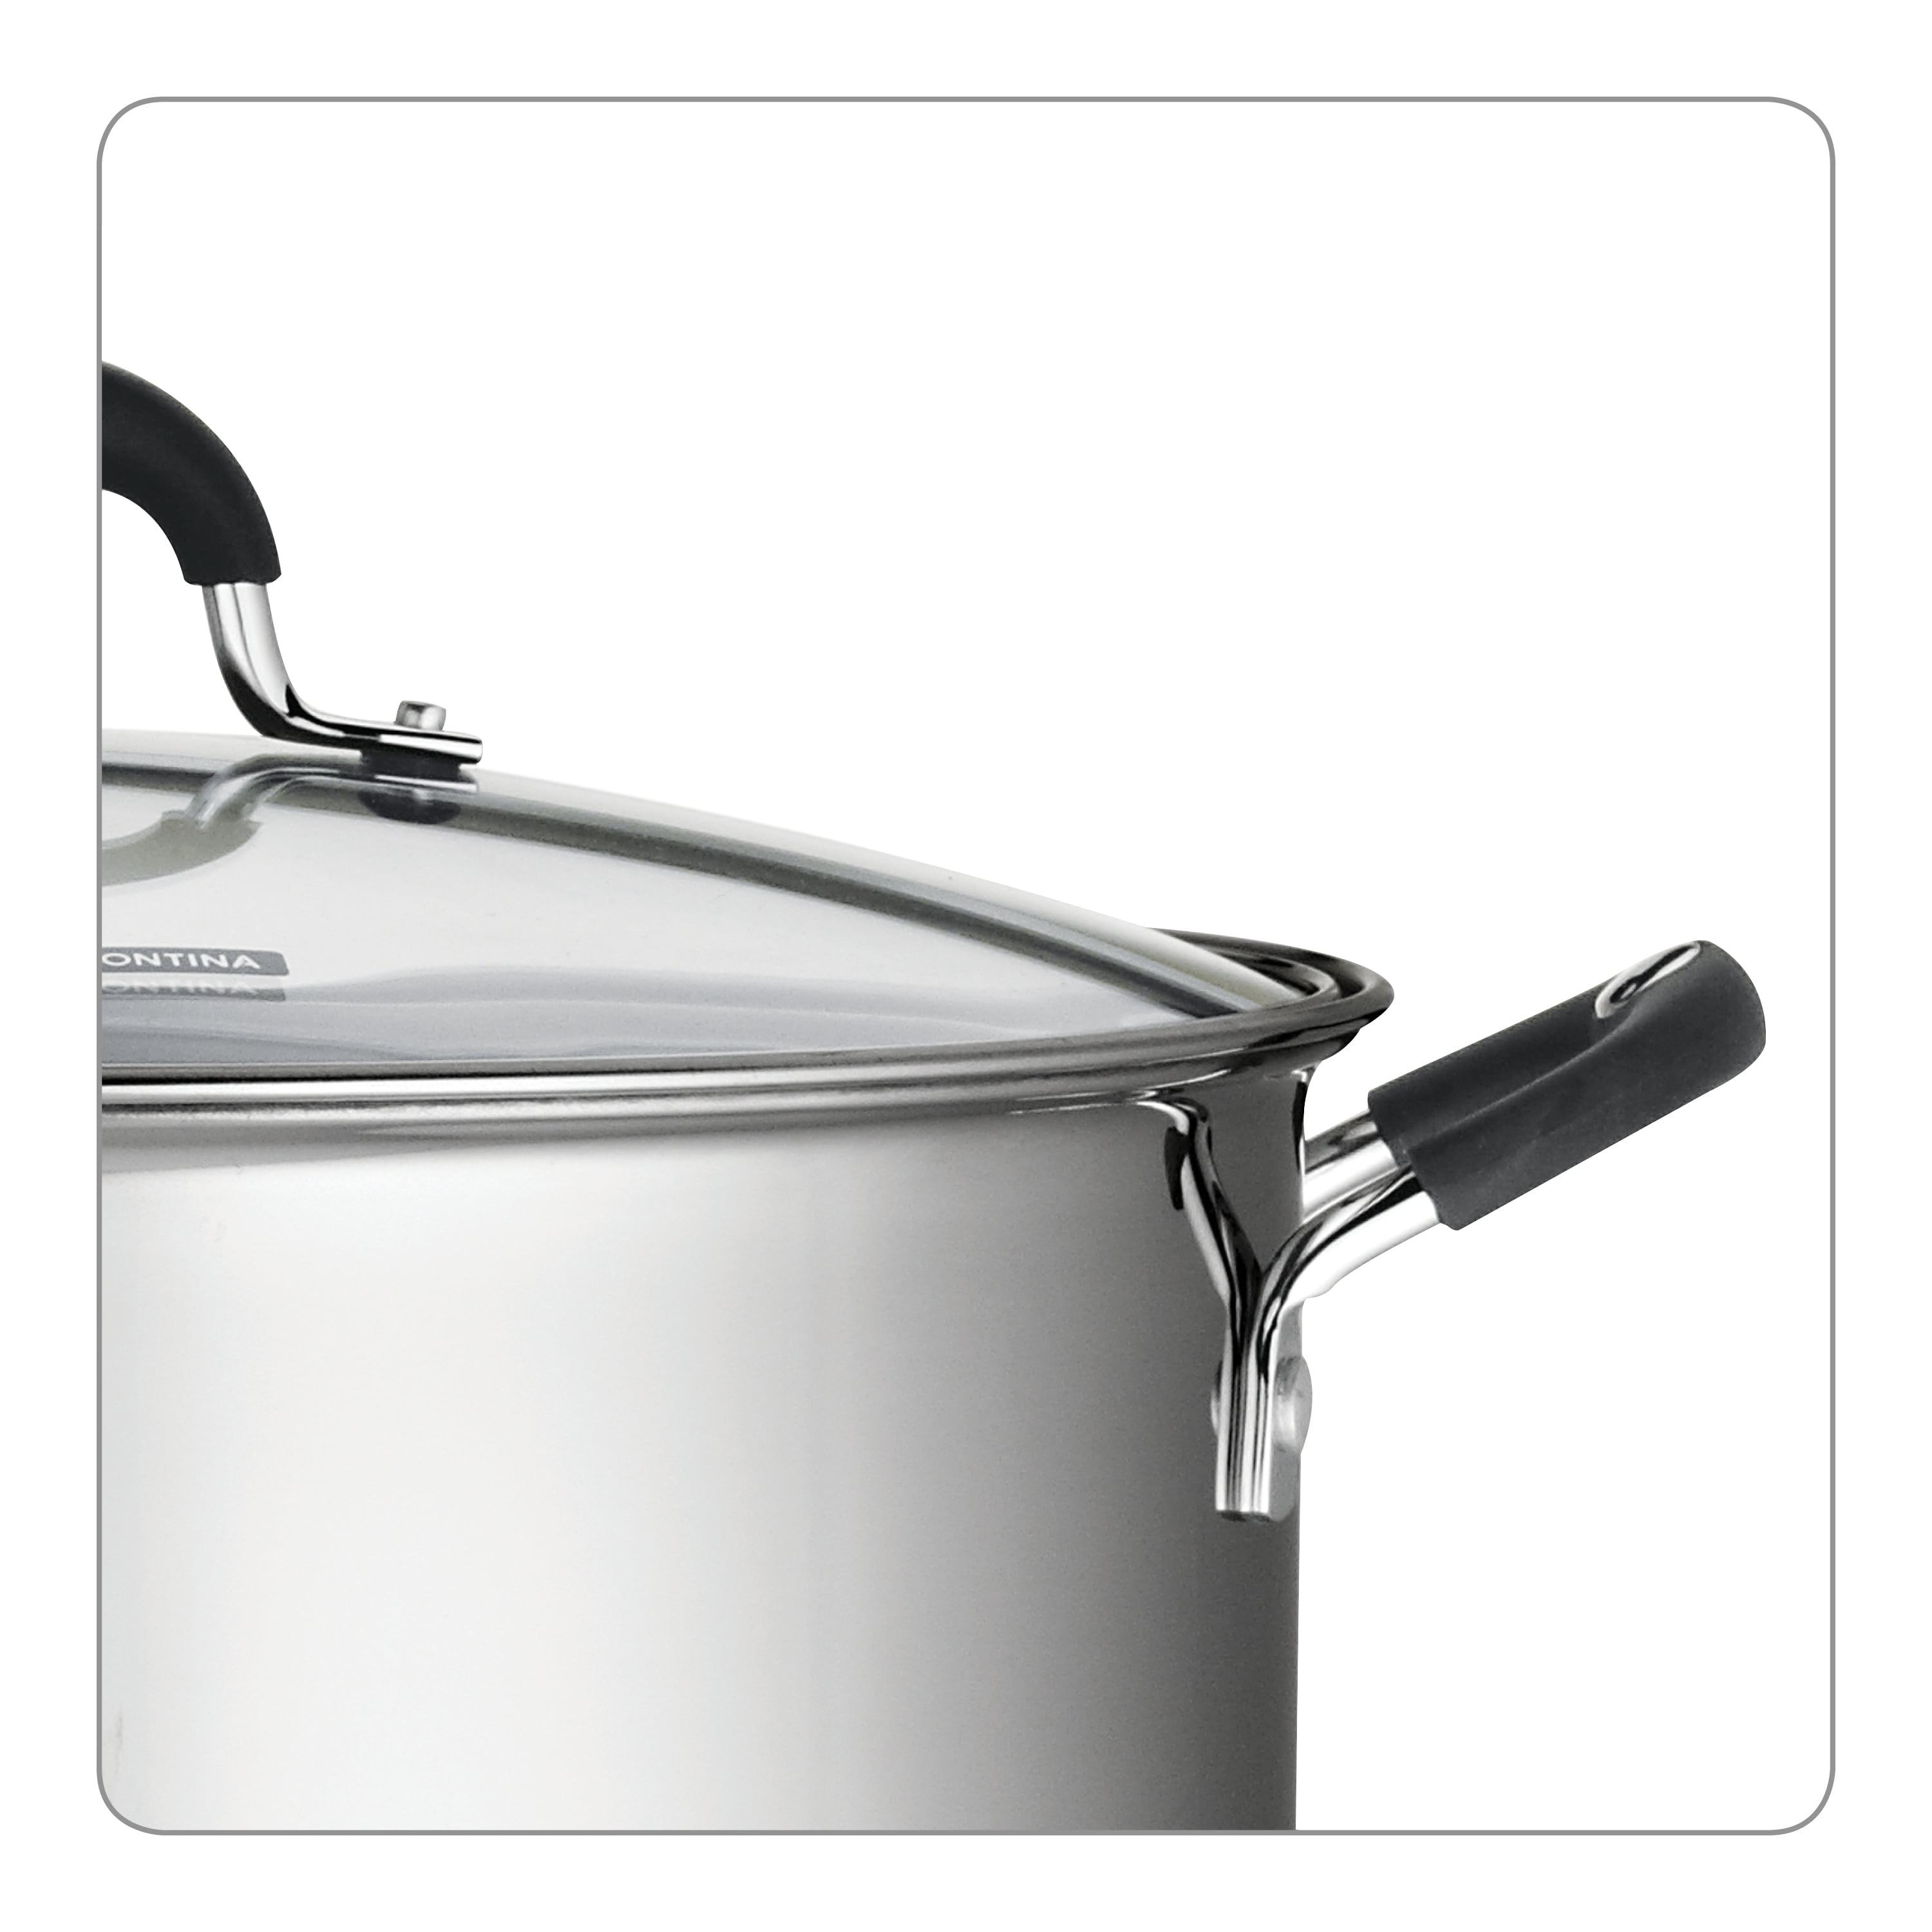 Tramontina 18/10 Stainless Steel 22-Quart Covered Stockpot 